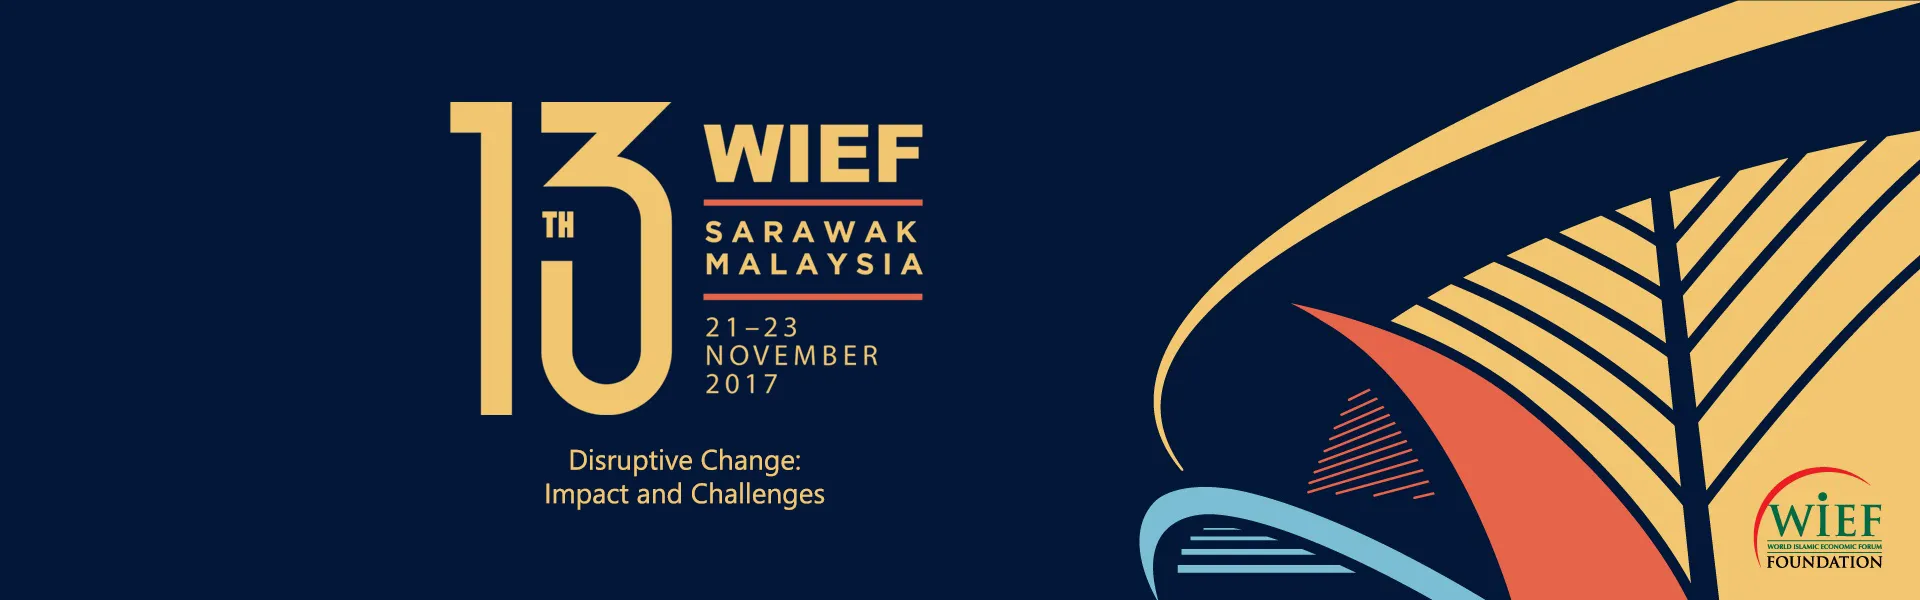 Challenge Accepted: Top 4 Startups to Pitch at 13th WIEF